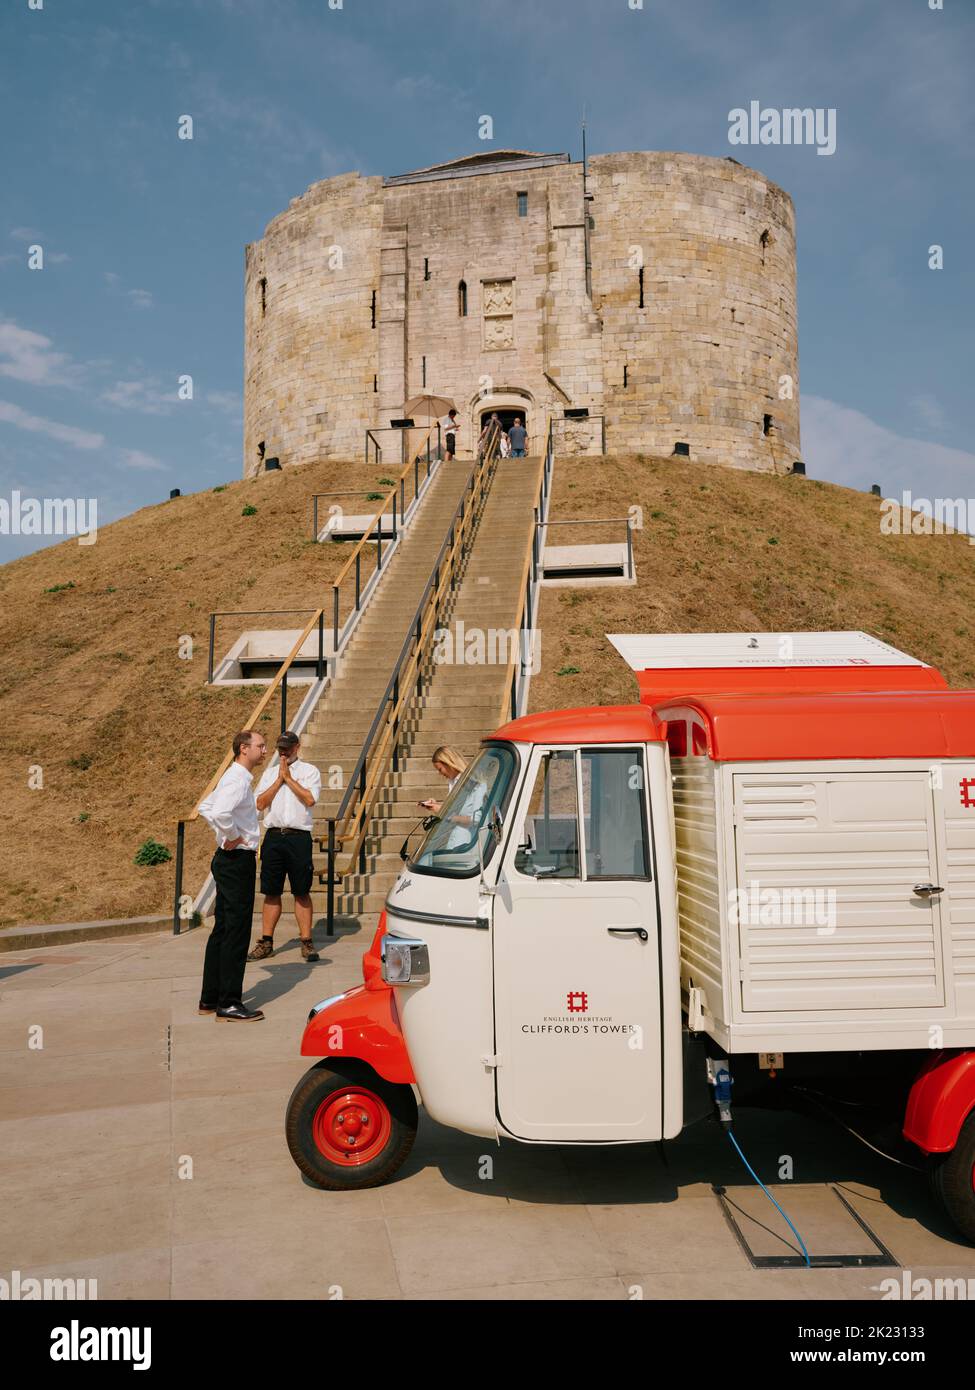 Summer tourists visiting the newly opened Clifford's Tower / York castle, York, North Yorkshire, England, UK - English Heritage tourism Stock Photo